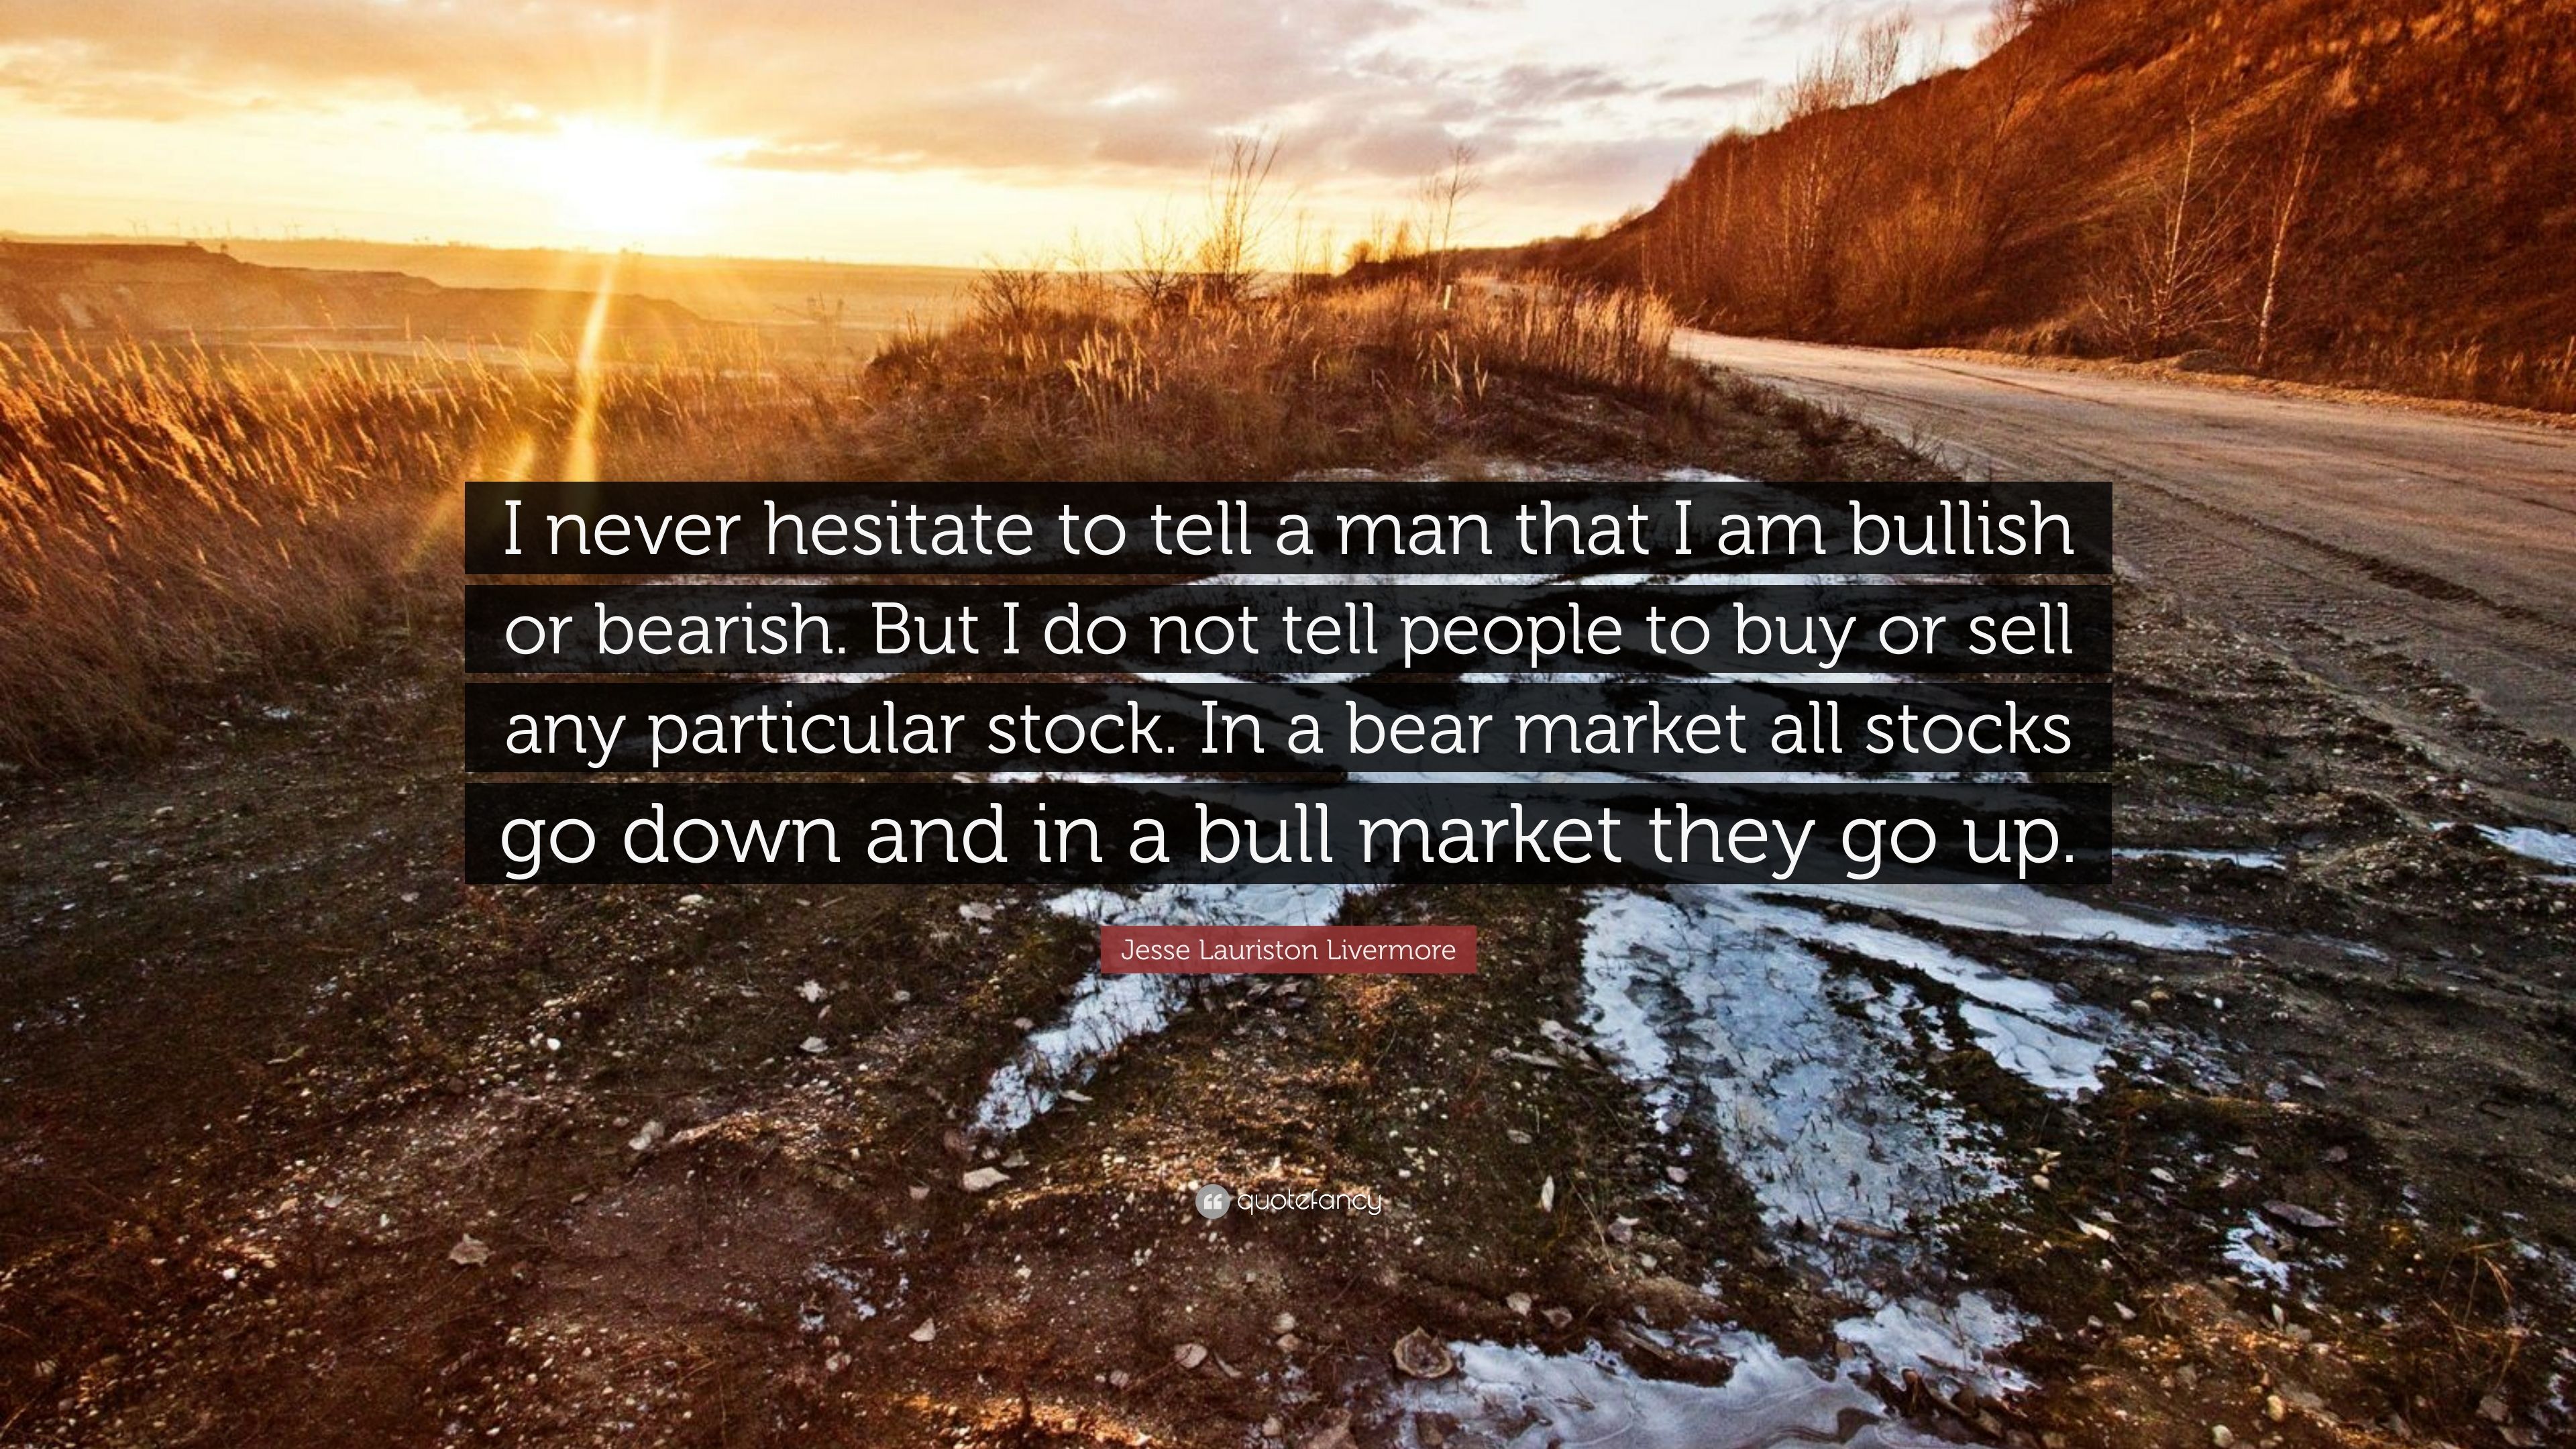 Jesse Lauriston Livermore Quote: “I never hesitate to tell a man that I am bullish or bearish. But I do not tell people to buy or sell any particular stoc.” (10 wallpaper)